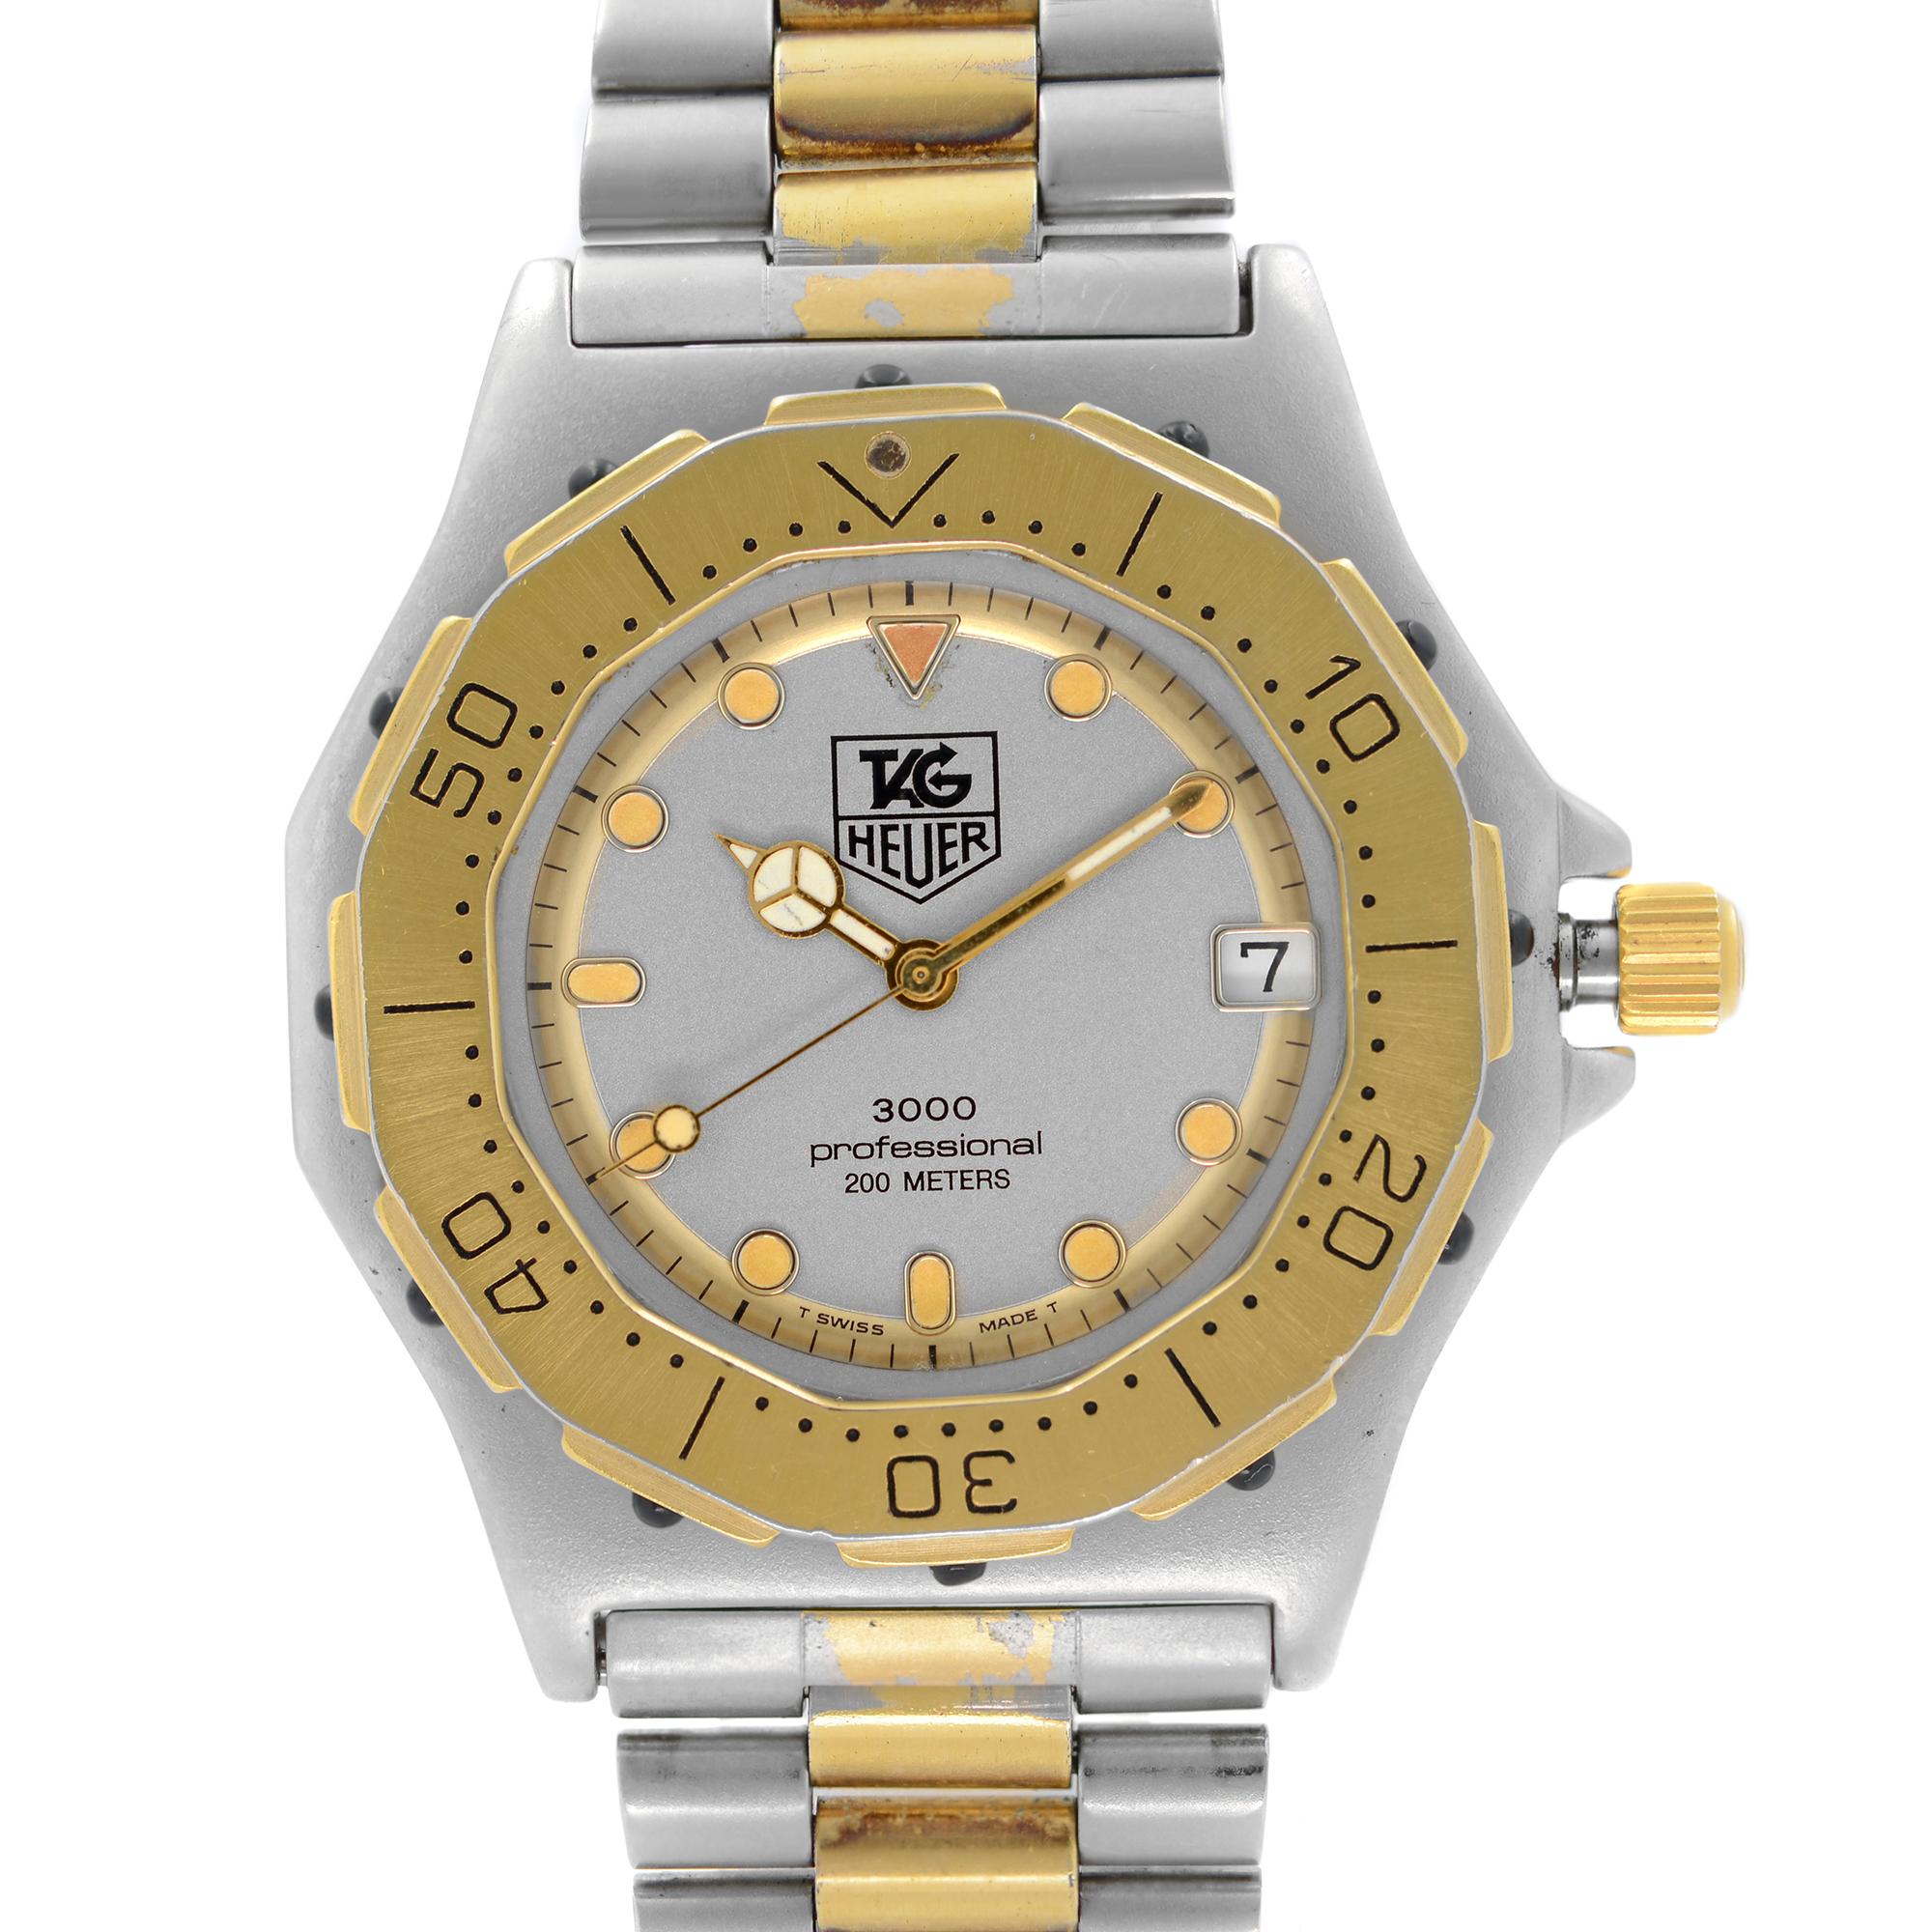 Vintage Pre Owned Tag Heuer Professional 3000 Steel Two-Tone Gray Dial Quartz Men's Watch 934.206.  This Beautiful Timepiece is Powered by Quartz (Battery) Movement and Features Round Stainless Steel Case with a Stainless Steel & Yellow Gold Plated